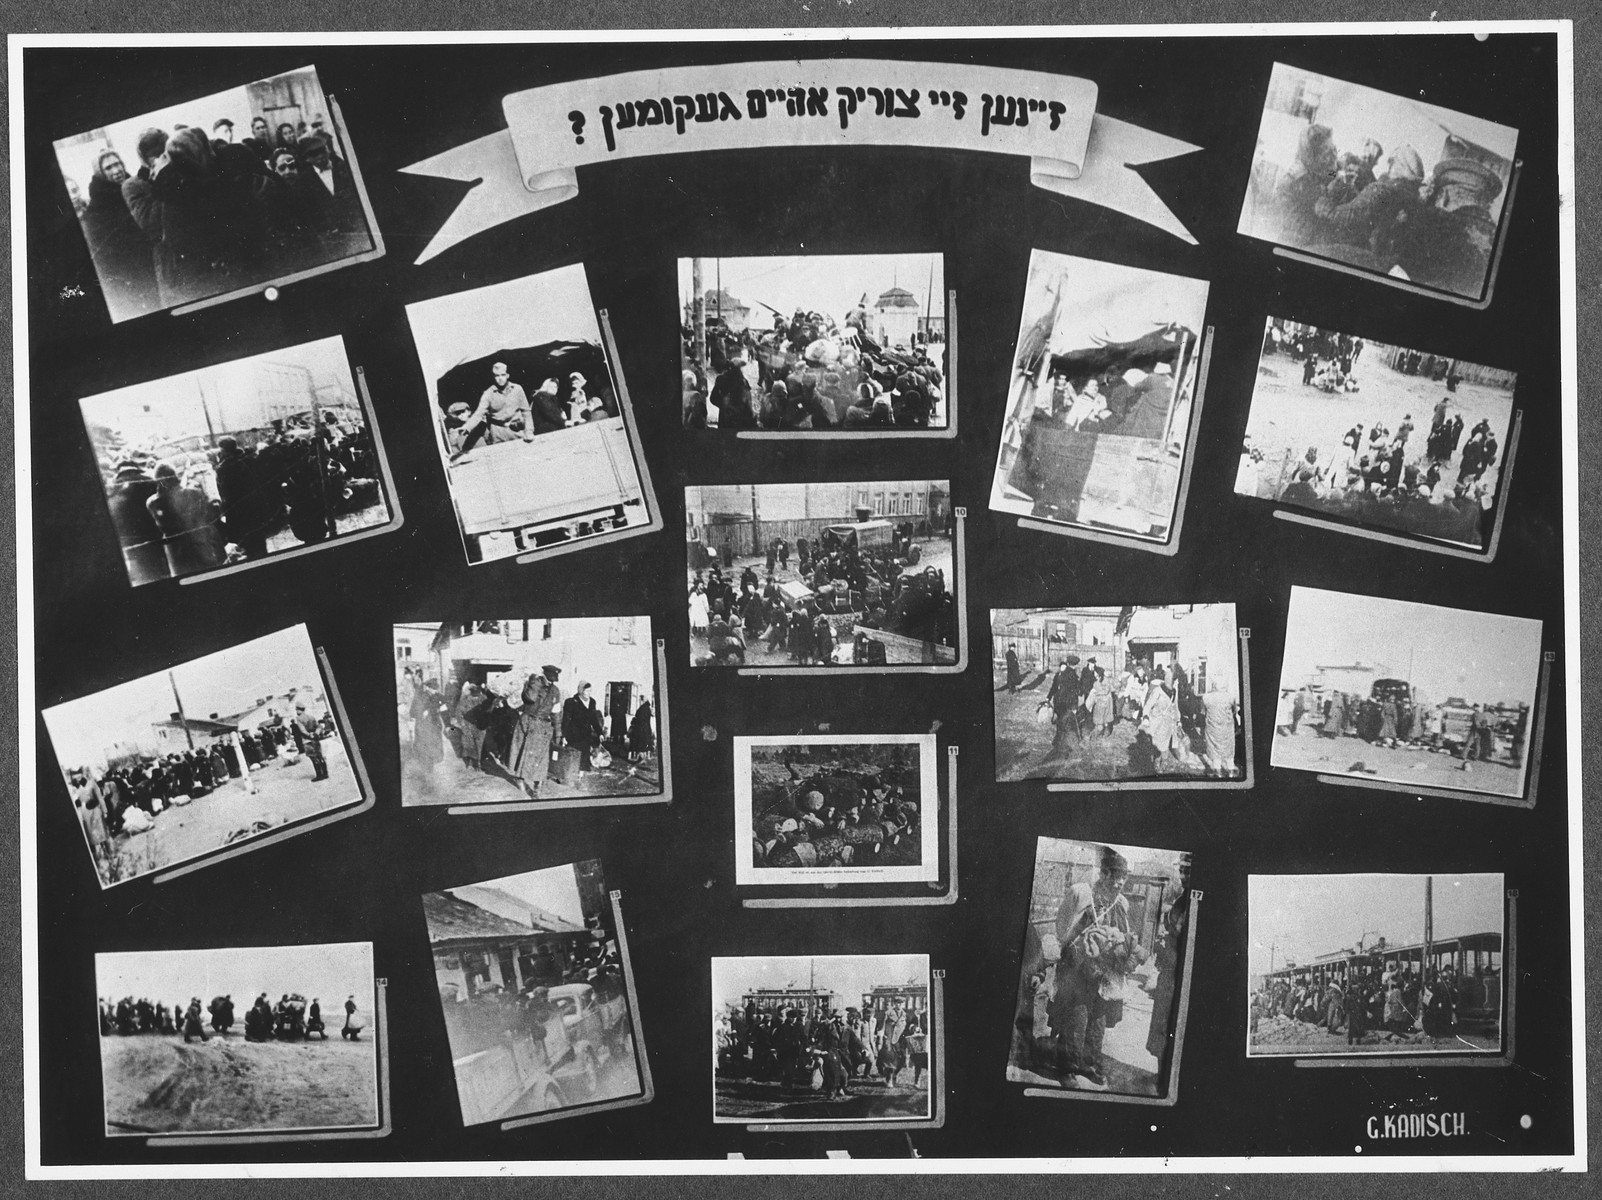 Display panel from a photo exhibition on the Holocaust entitled, "Did They Come Back?" created by photographer George Kaddish in a displaced persons' camp.

The exhibition consisted both of photographs that he shot in the Kovno ghetto as well as other photographs he collected from other ghettos and camps.